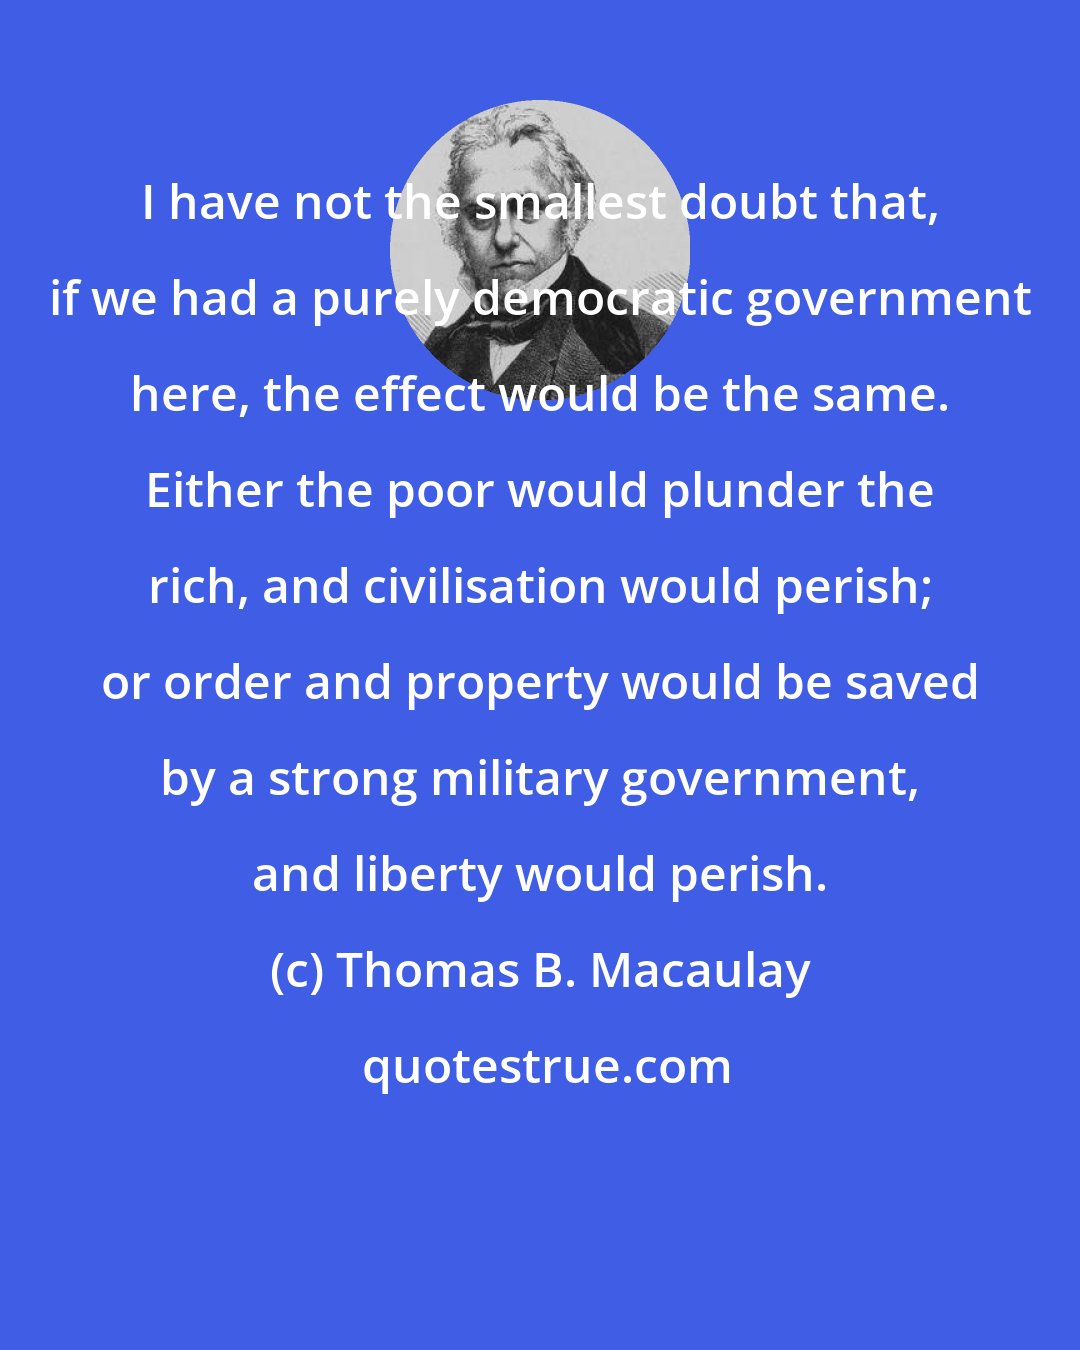 Thomas B. Macaulay: I have not the smallest doubt that, if we had a purely democratic government here, the effect would be the same. Either the poor would plunder the rich, and civilisation would perish; or order and property would be saved by a strong military government, and liberty would perish.